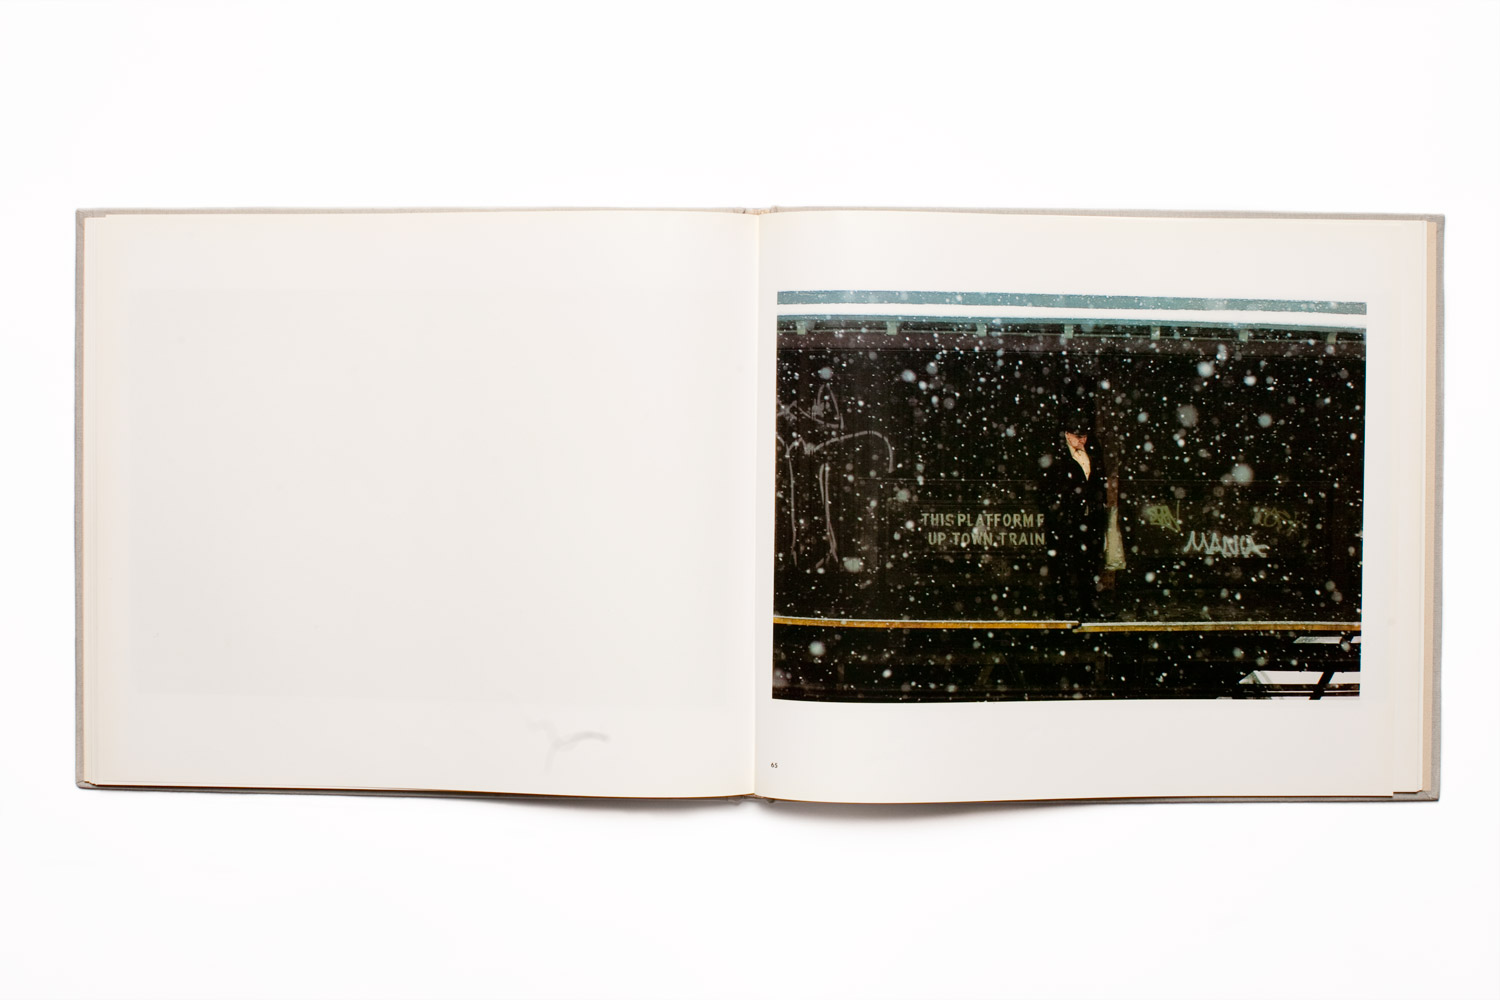 The original edition included several breaks where a single image was placed against a blank page.